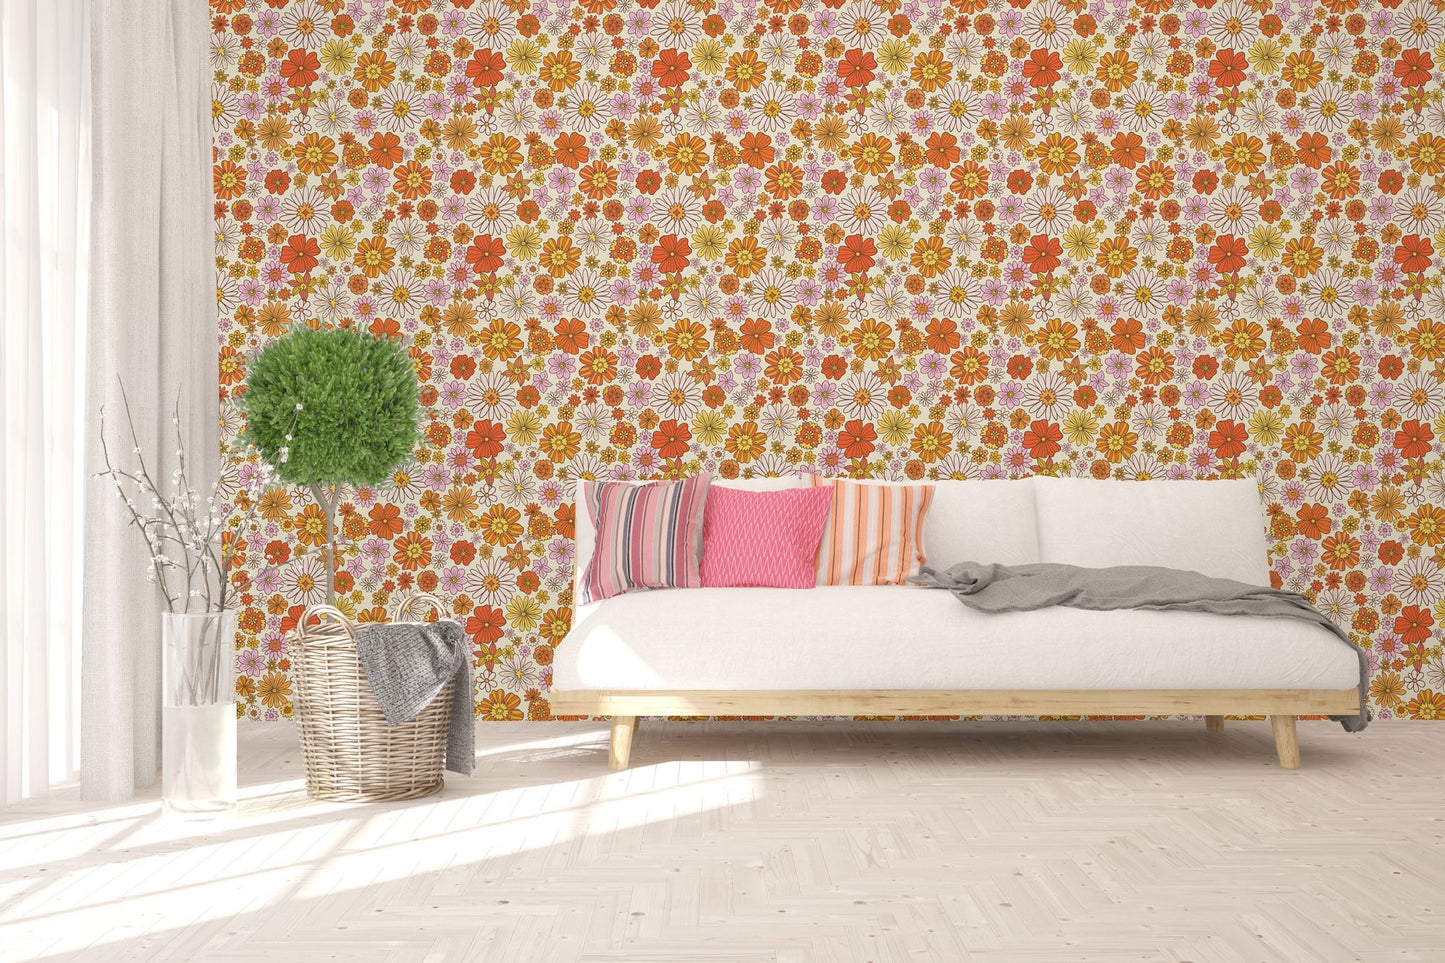 1970s Vintage-Inspired Flower Print Wallpaper - 70s Style Peel and Stick or Traditional Wallpaper